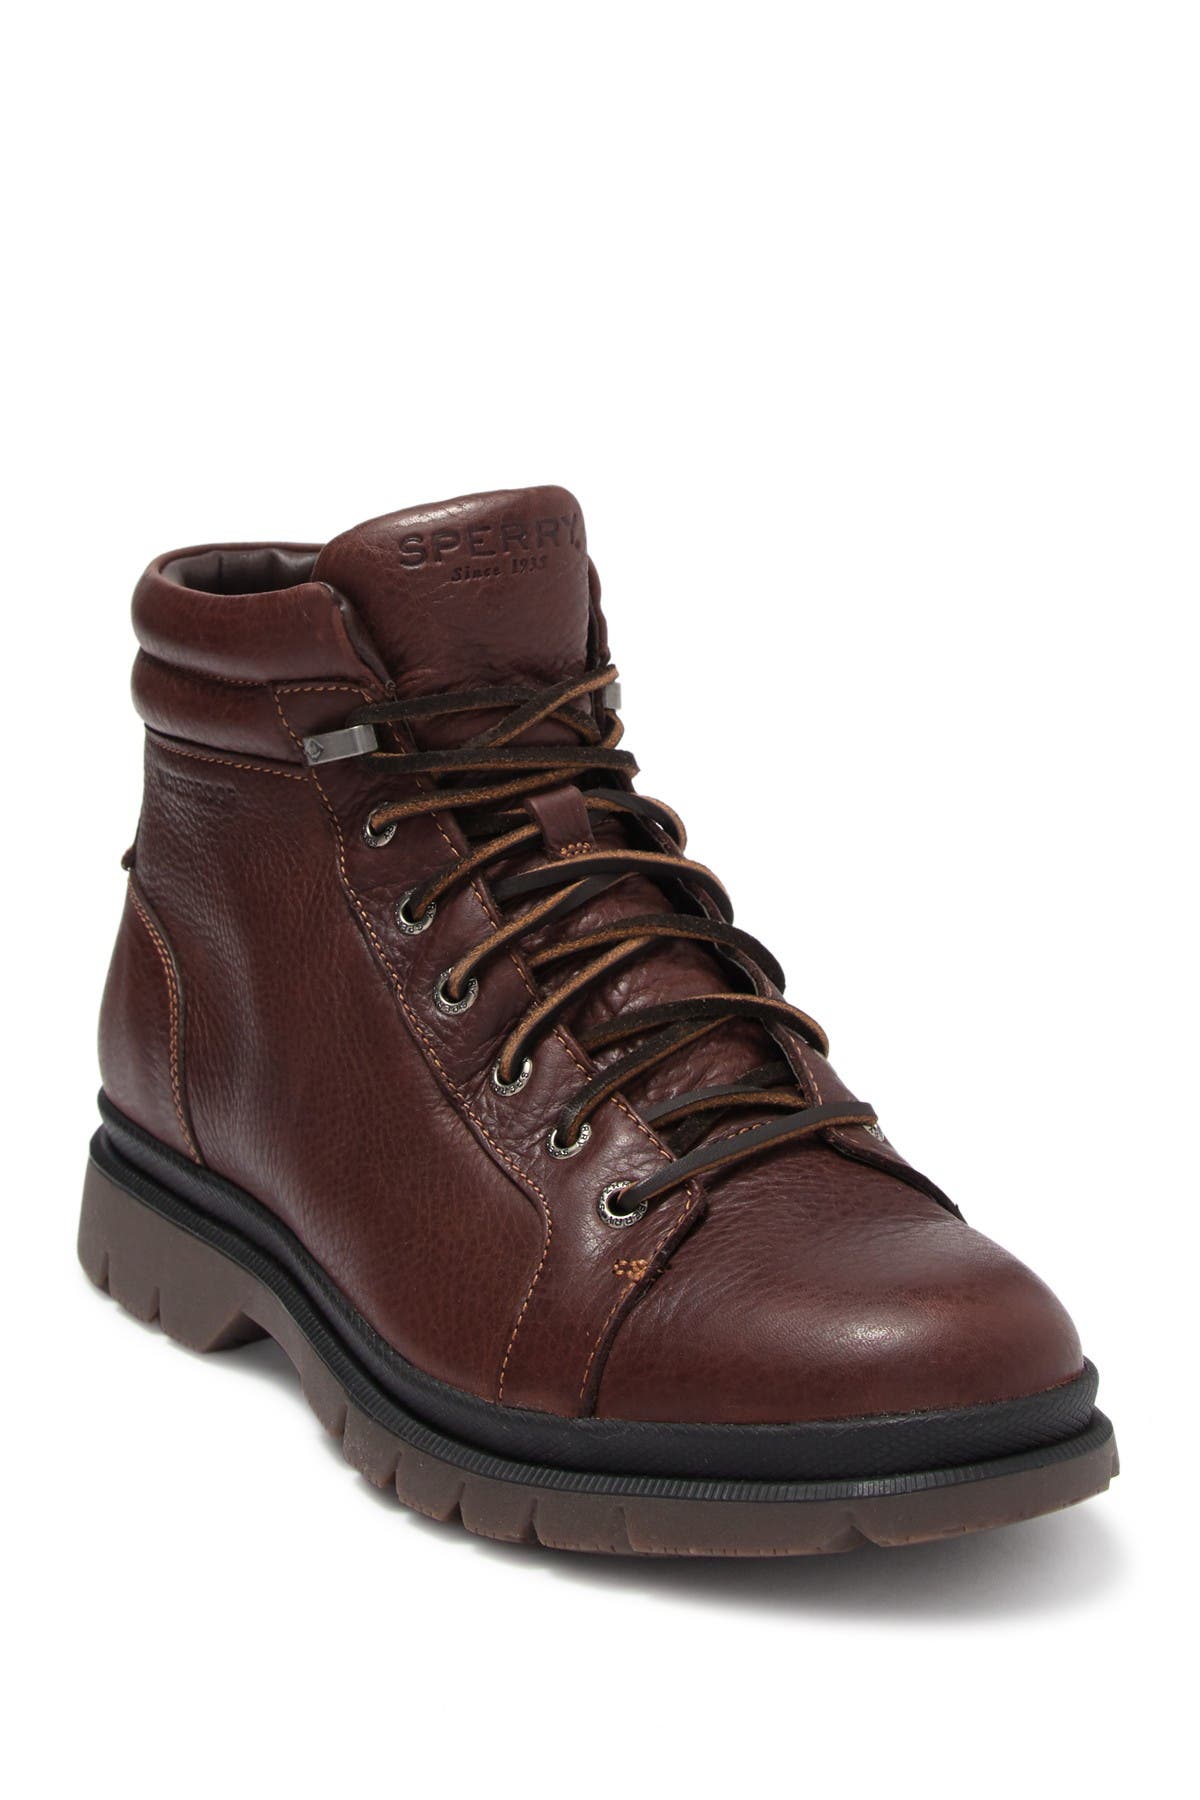 Sperry | Watertown Leather Lace-Up Boot 